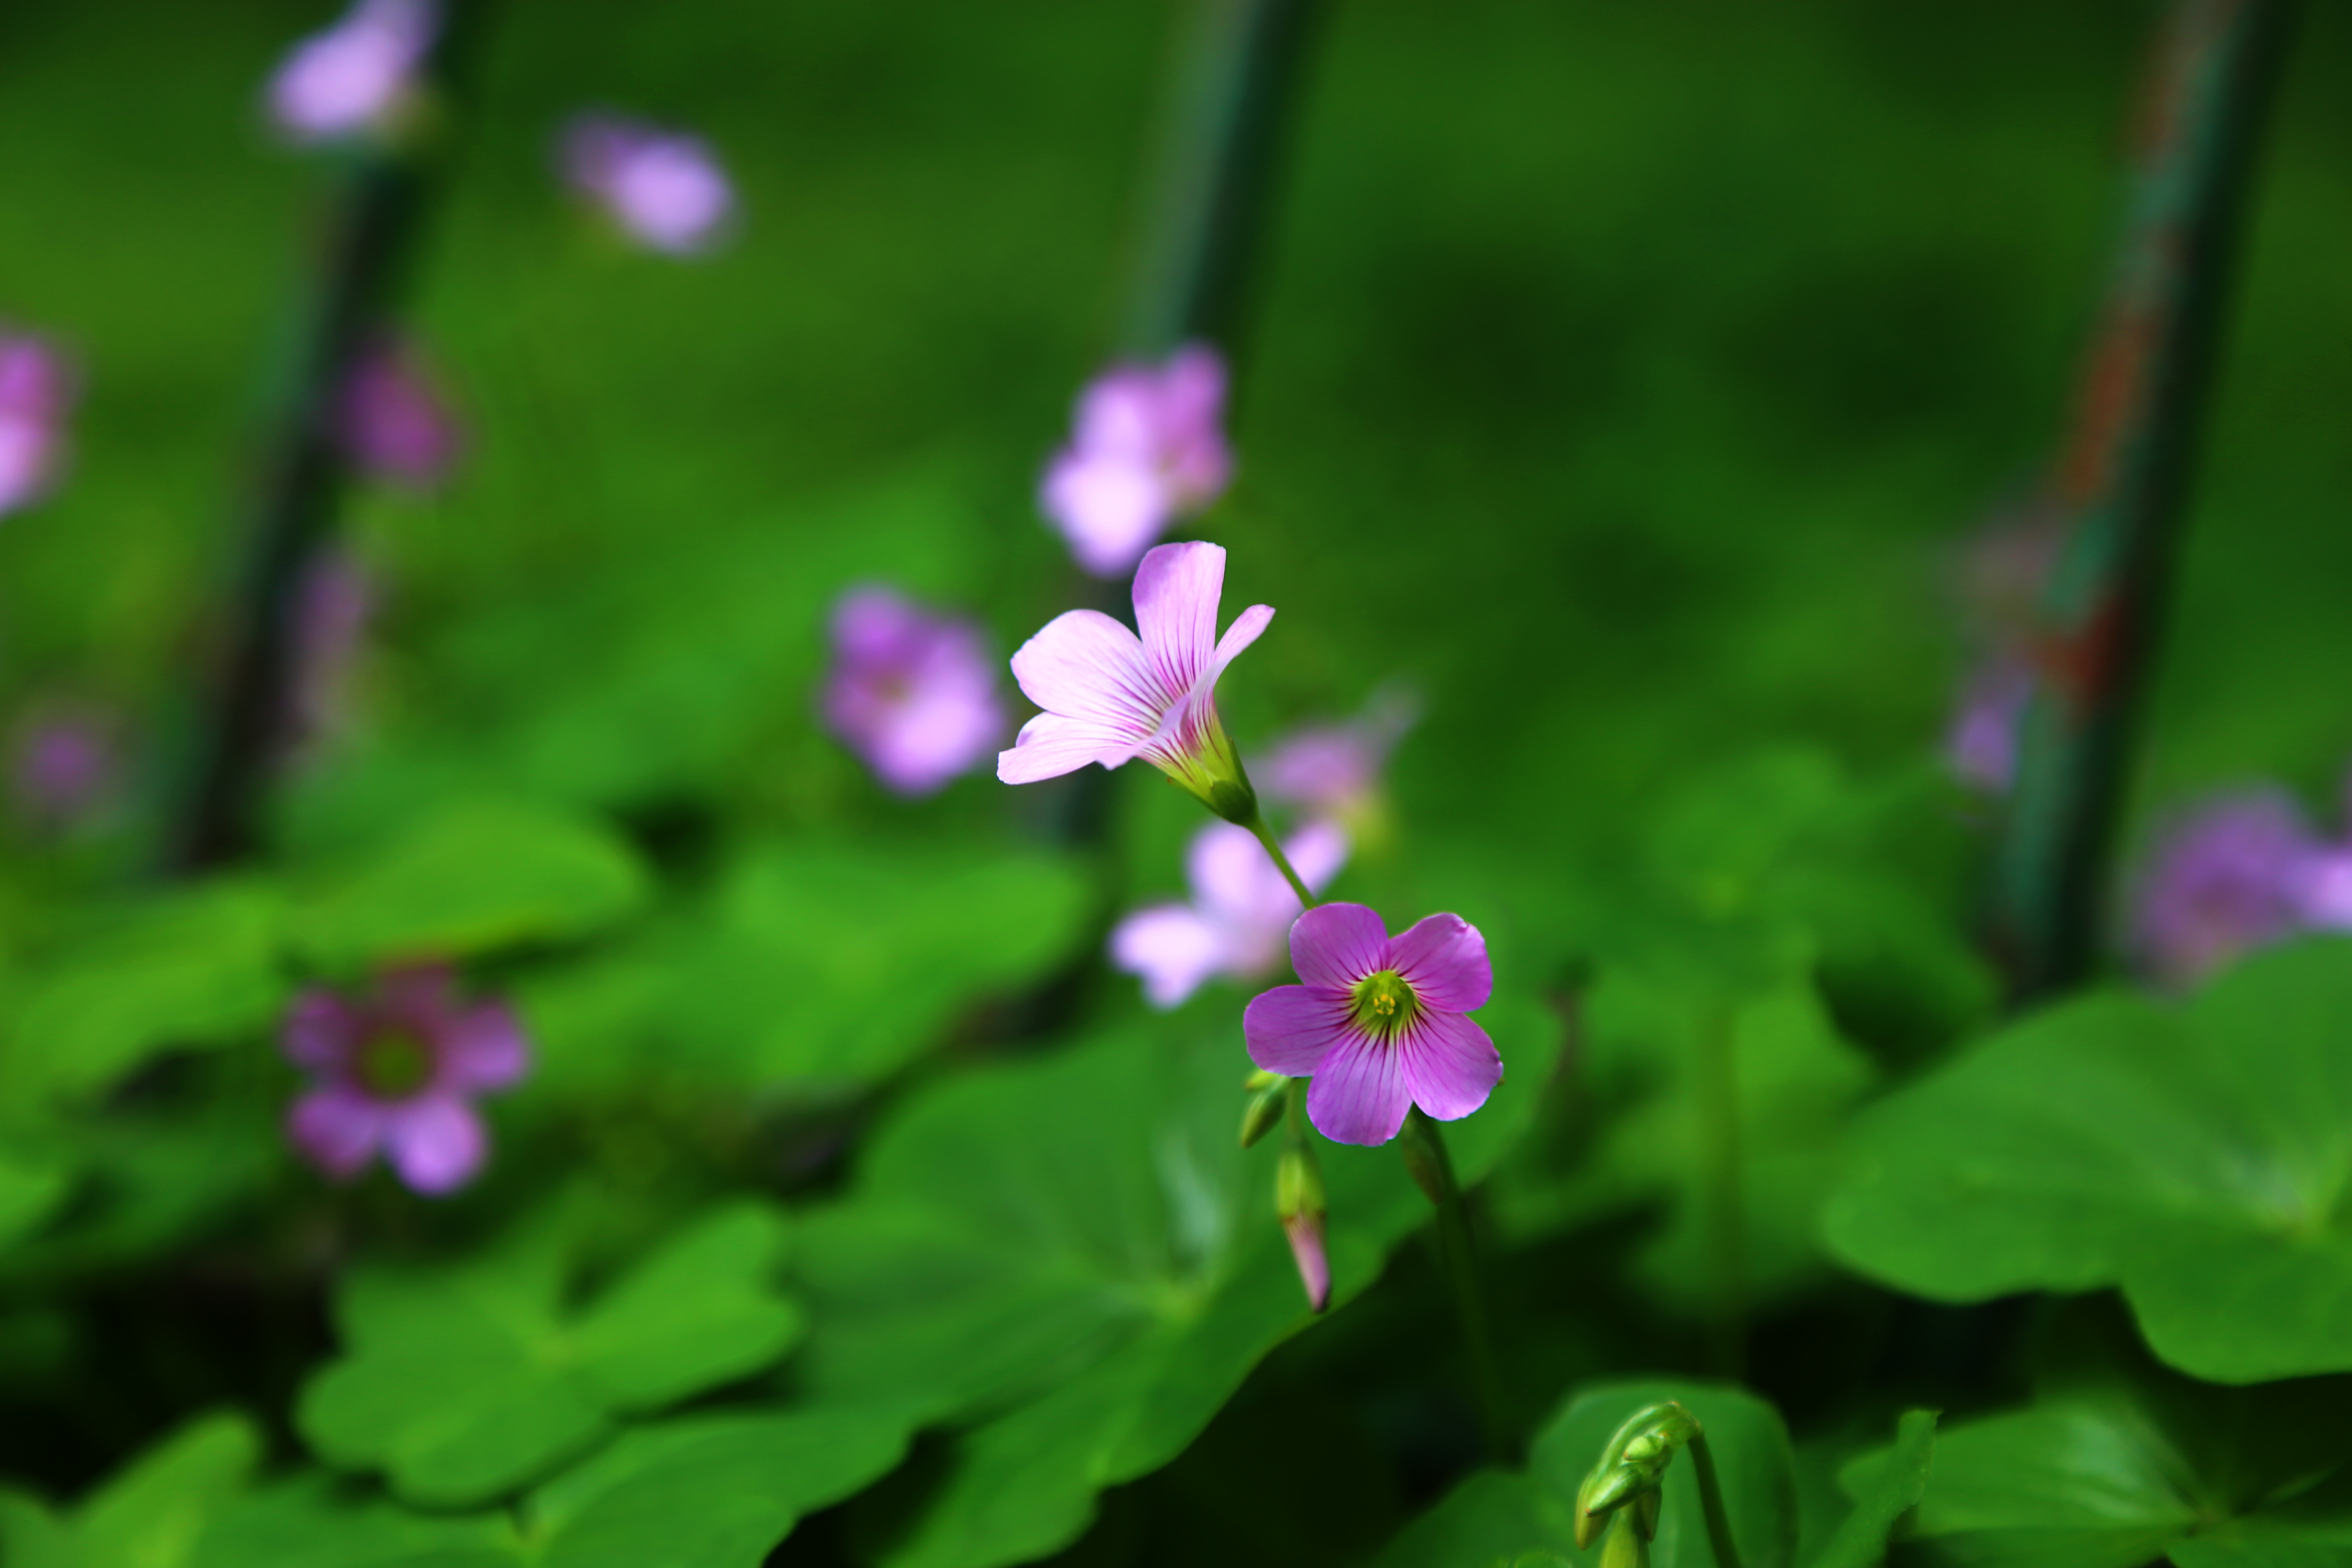 Green Plants Spring Leaves Nature Flowers Closeup Blurred Blurry Background 5472x3648